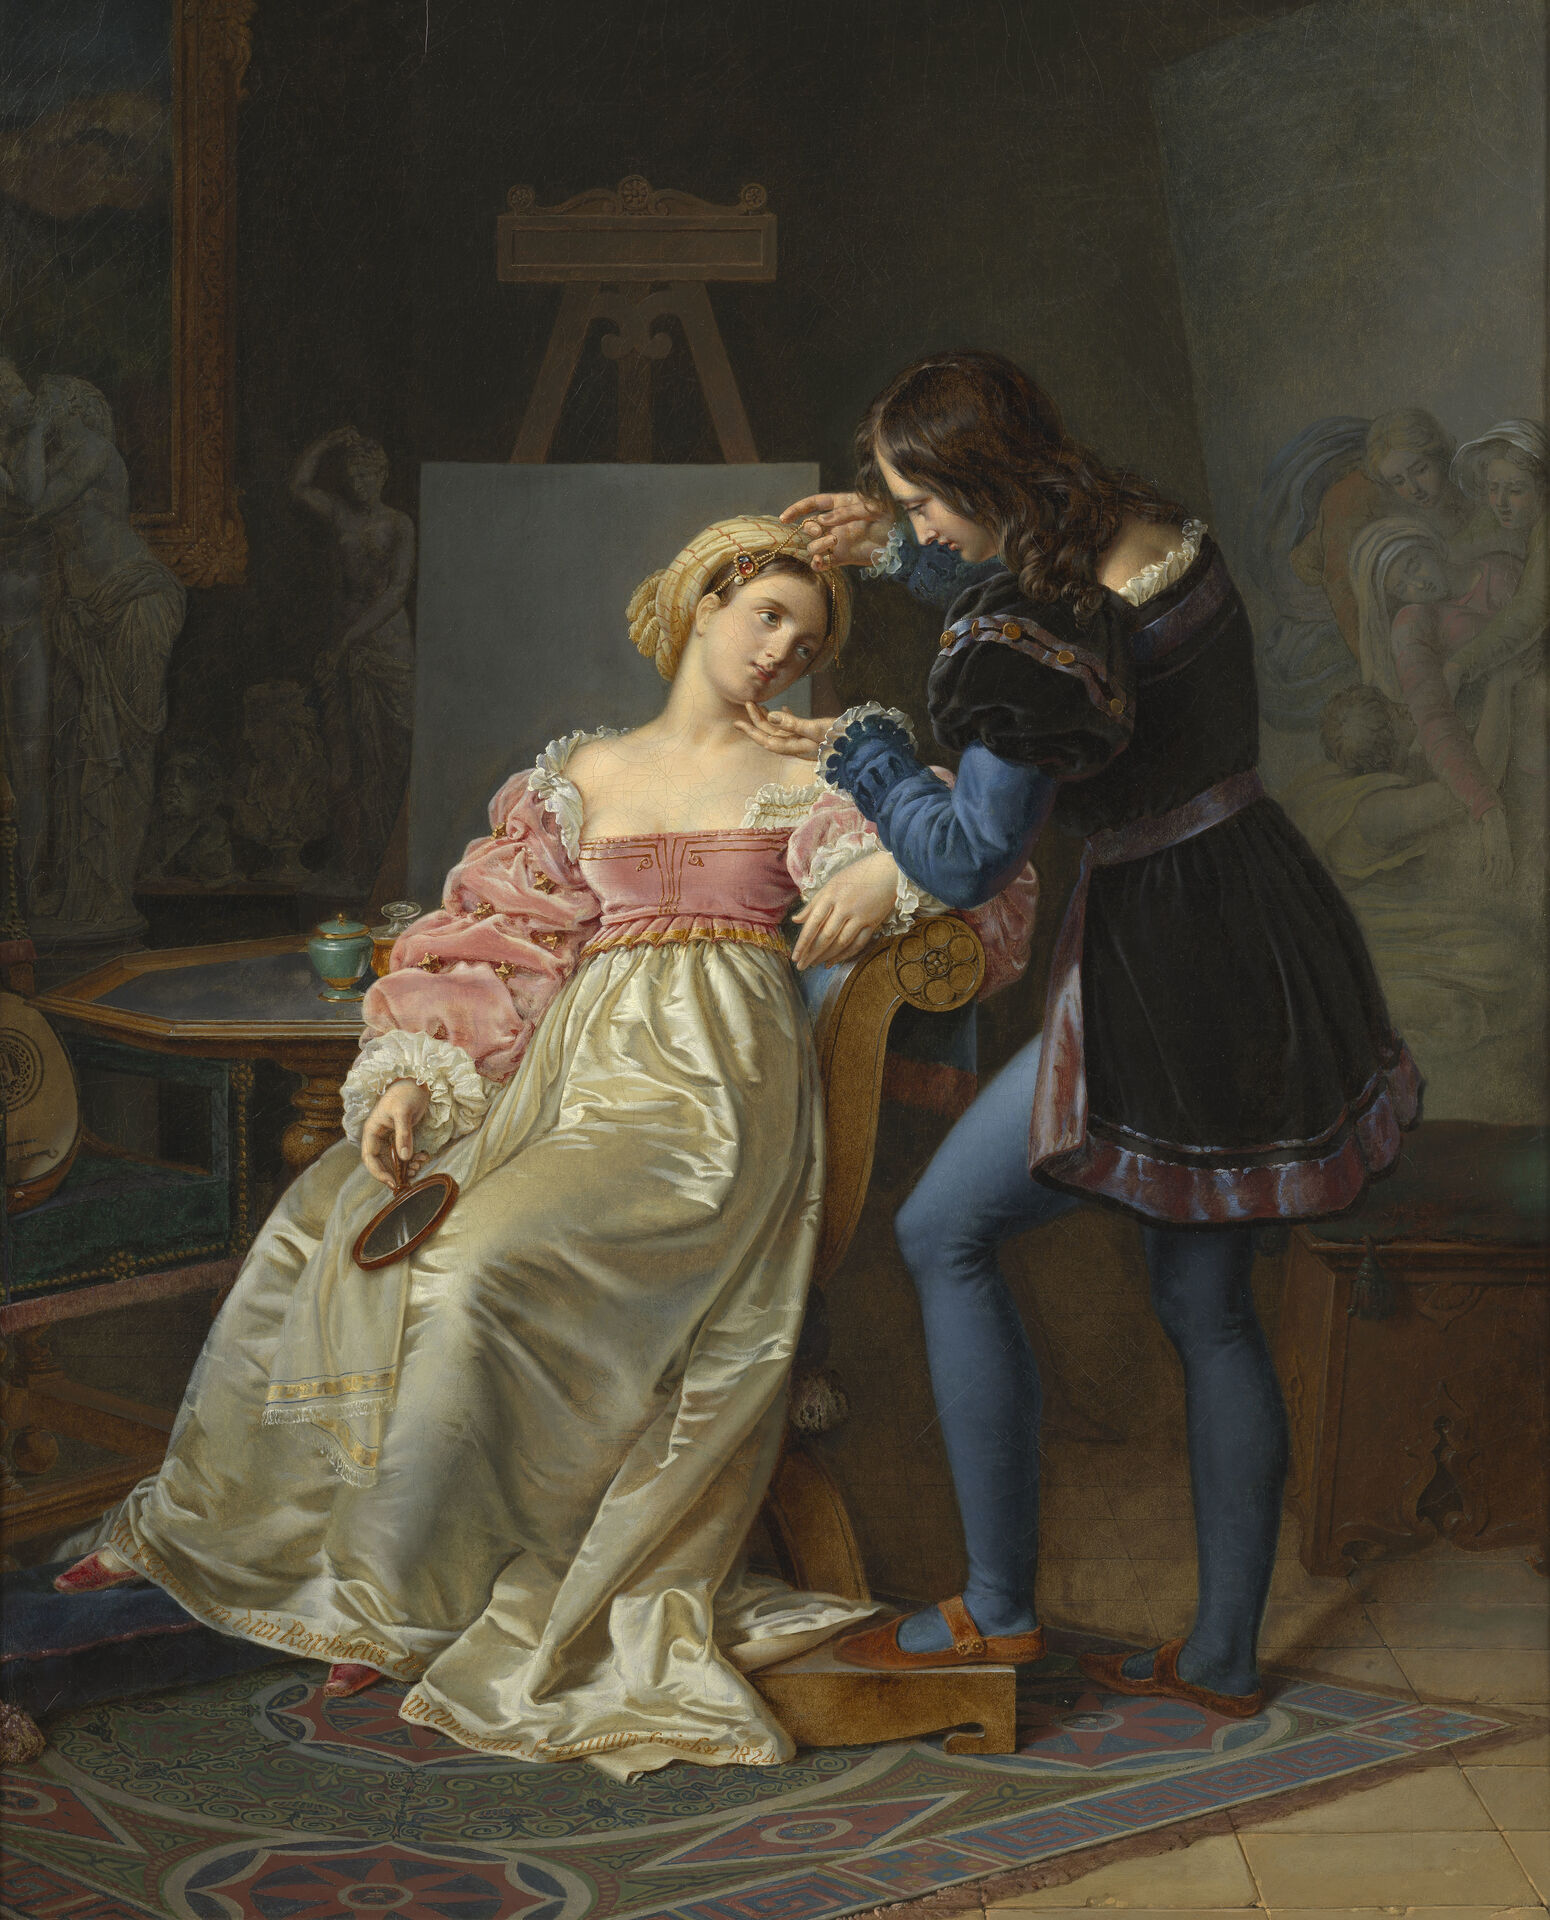 Marie-Philippe Coupin de la Couperie, Raphael Adjusts Fornarina’s Hair Before Painting her Portrait. Painted in 1824, oil on canvas. Nationalmuseum.